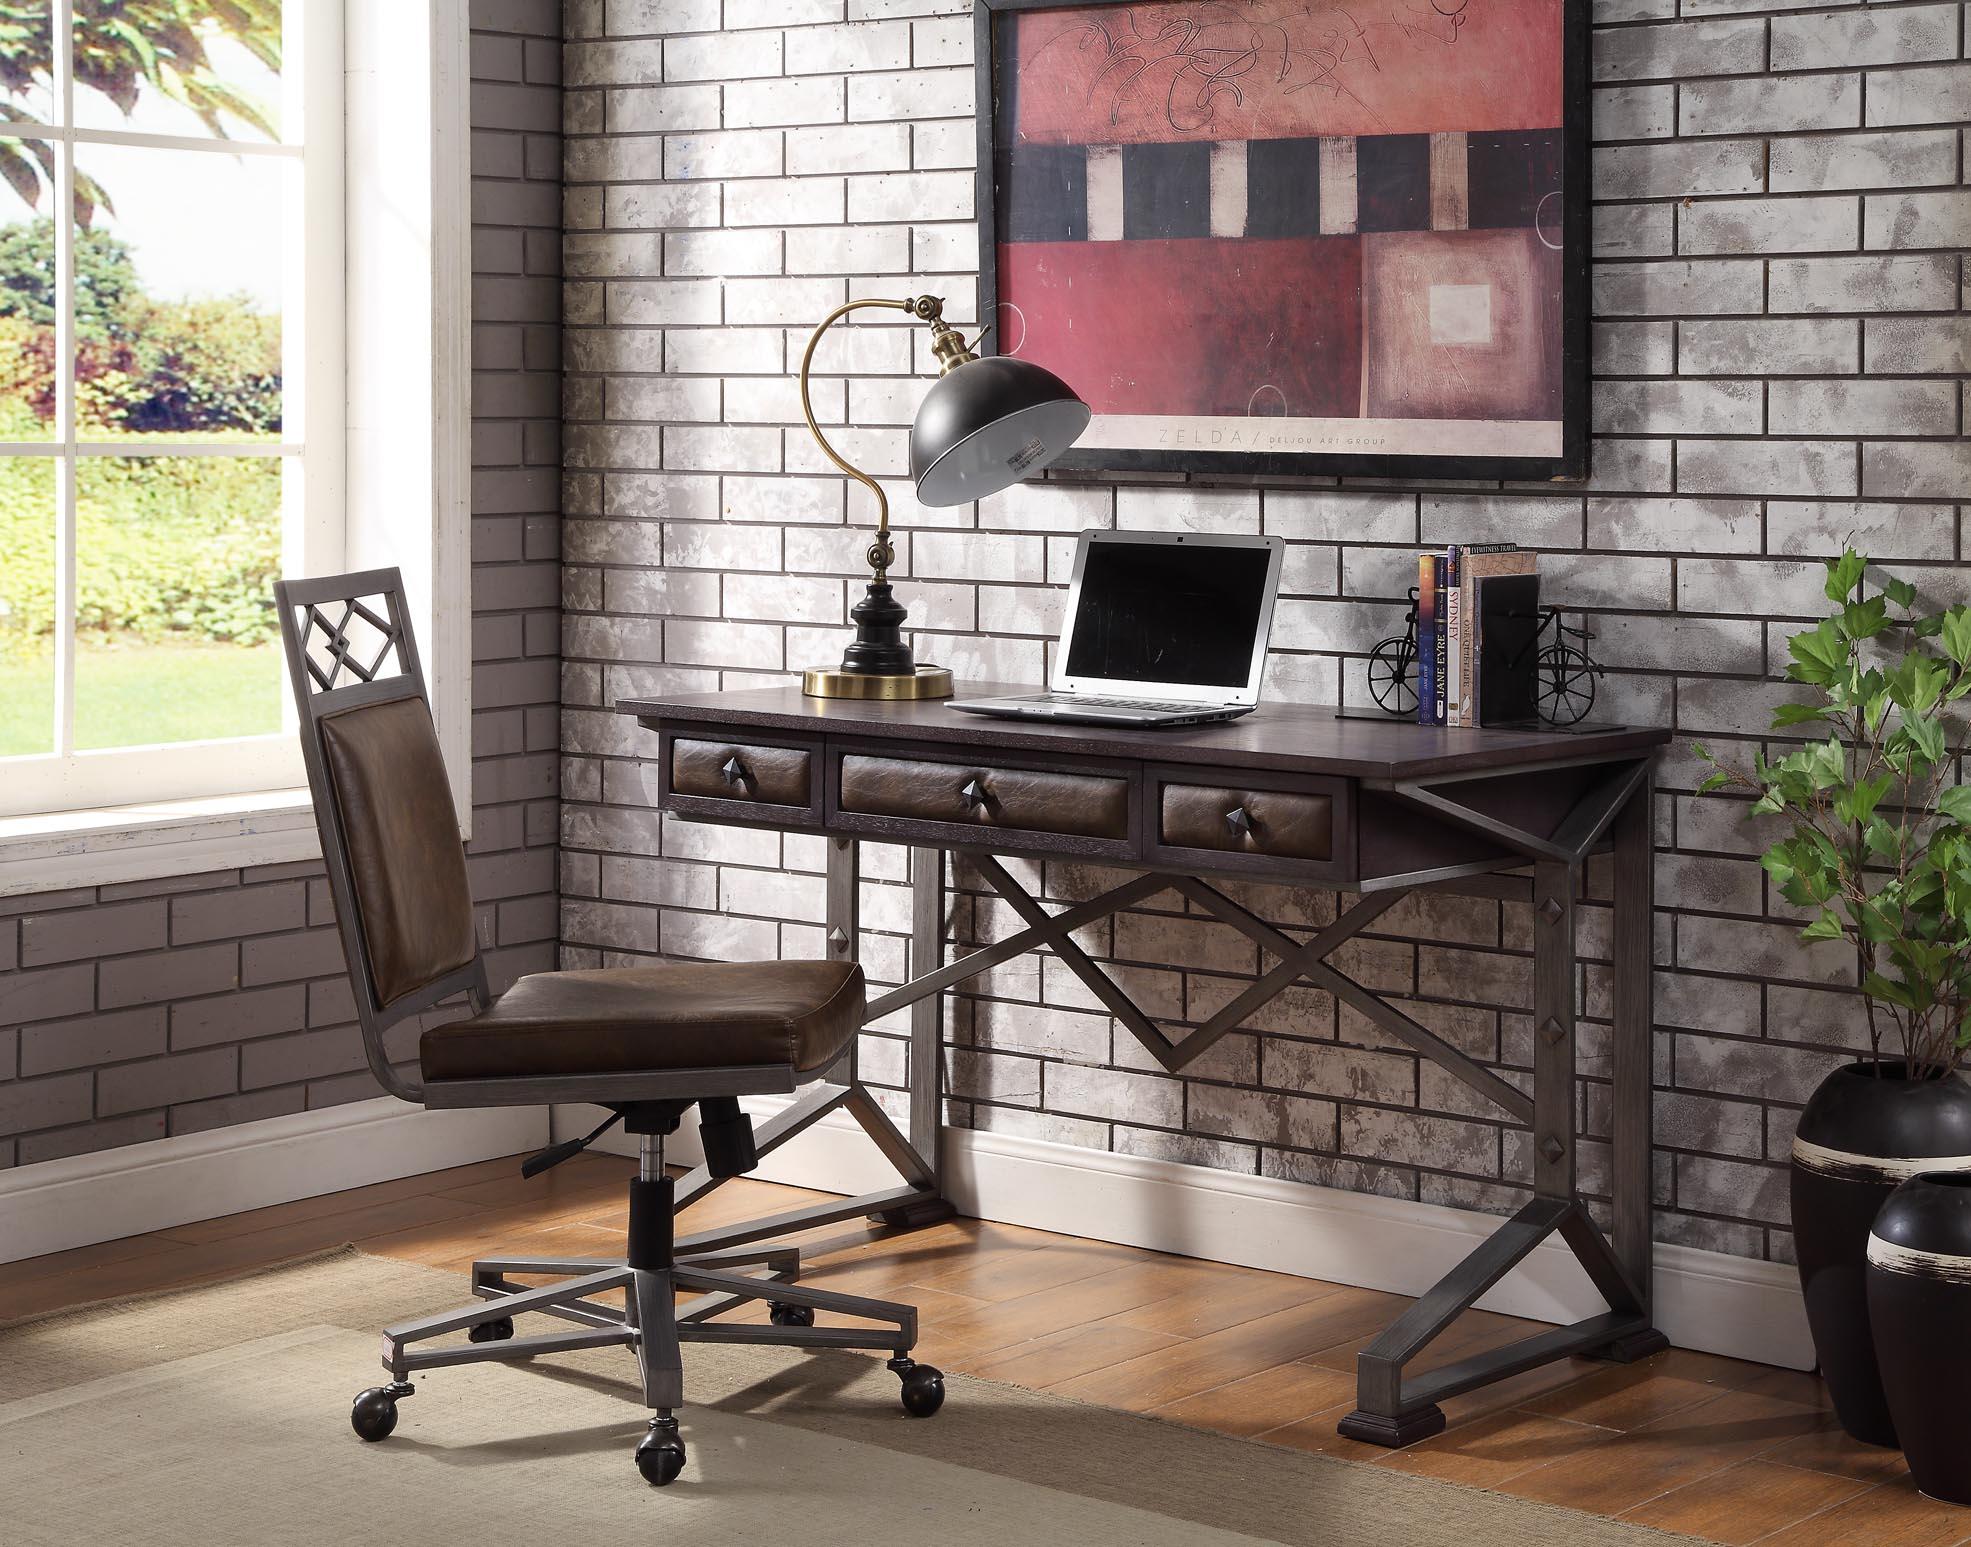 Contemporary, Modern Home Office Set 92955 92955 Set-2 in Brown, Metal Leather